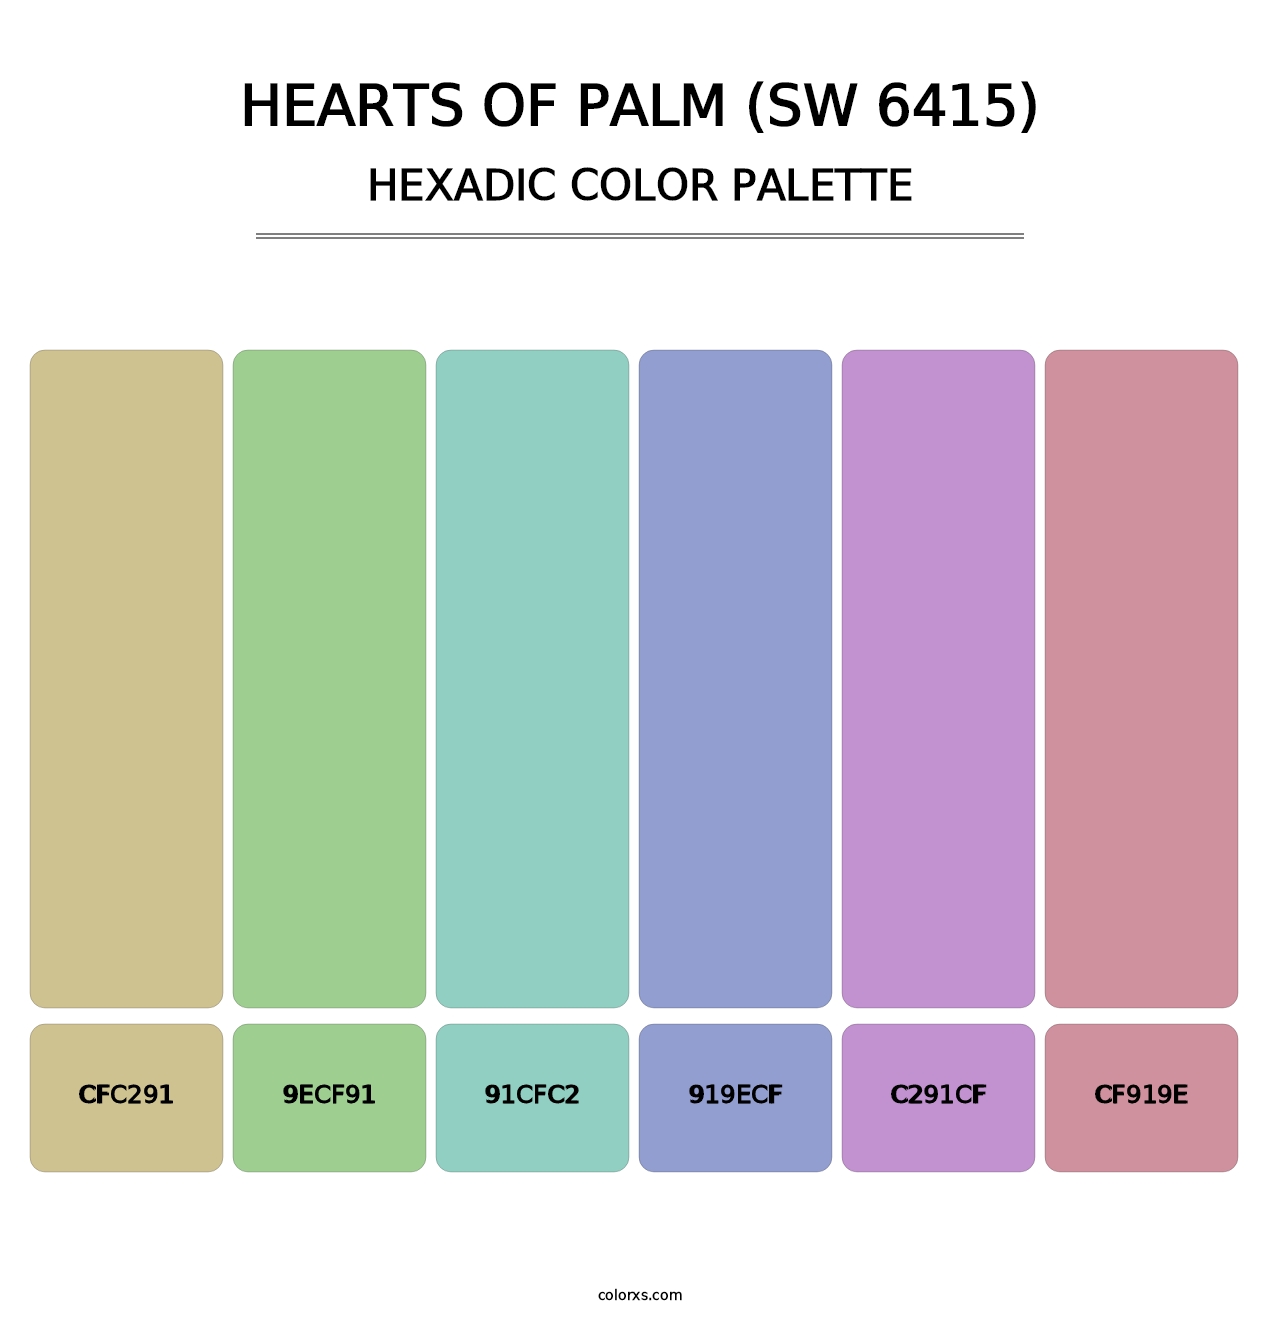 Hearts of Palm (SW 6415) - Hexadic Color Palette